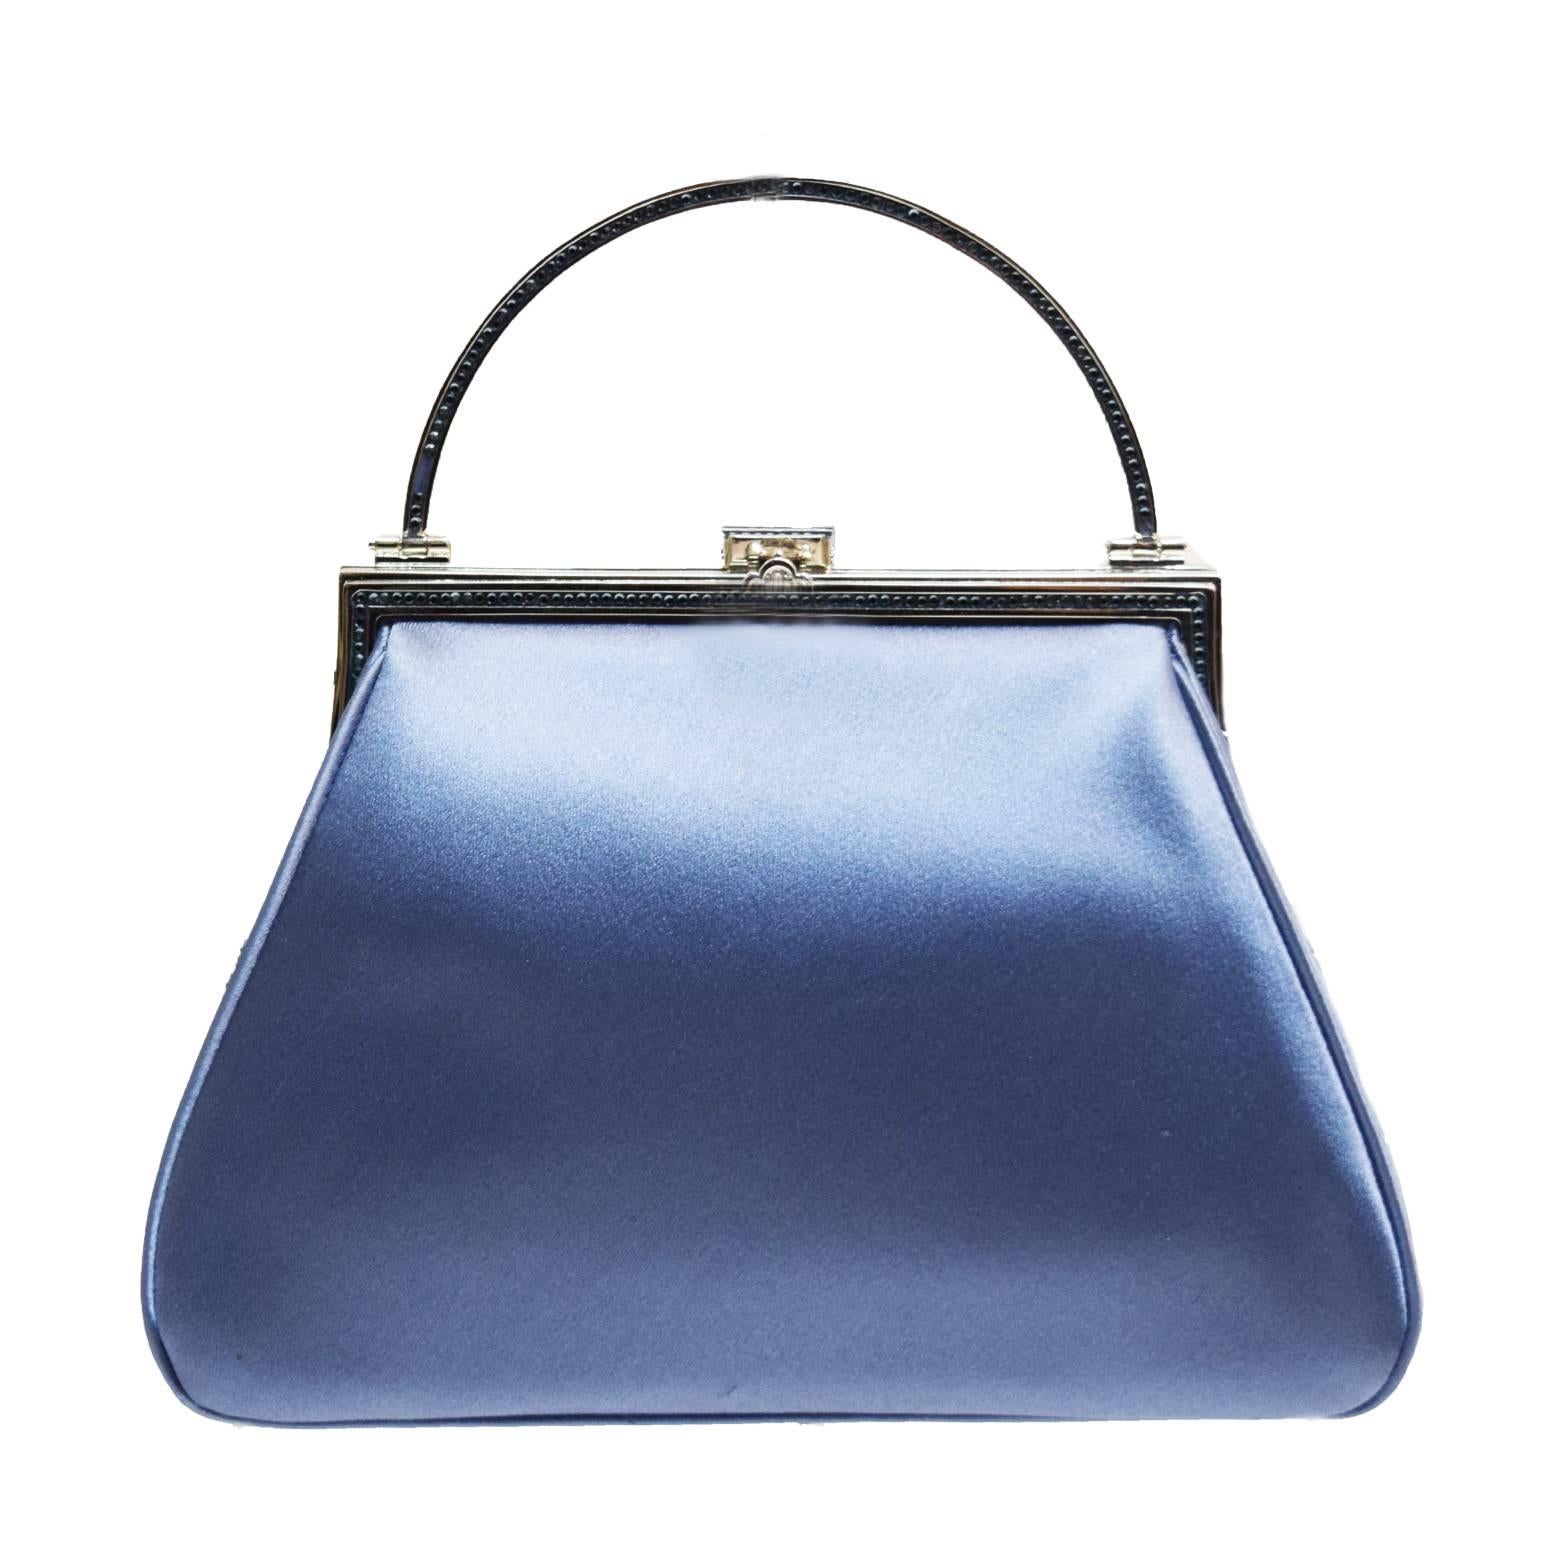 Judith Leiber Hydrangea blue silk satin evening bag. Silver metal frame, chain shoulder strap and small handle embellished with blue Swarovski crystals on both sides of the frame and handle. Clasp is a silver handbag embellished with clear Swarovski